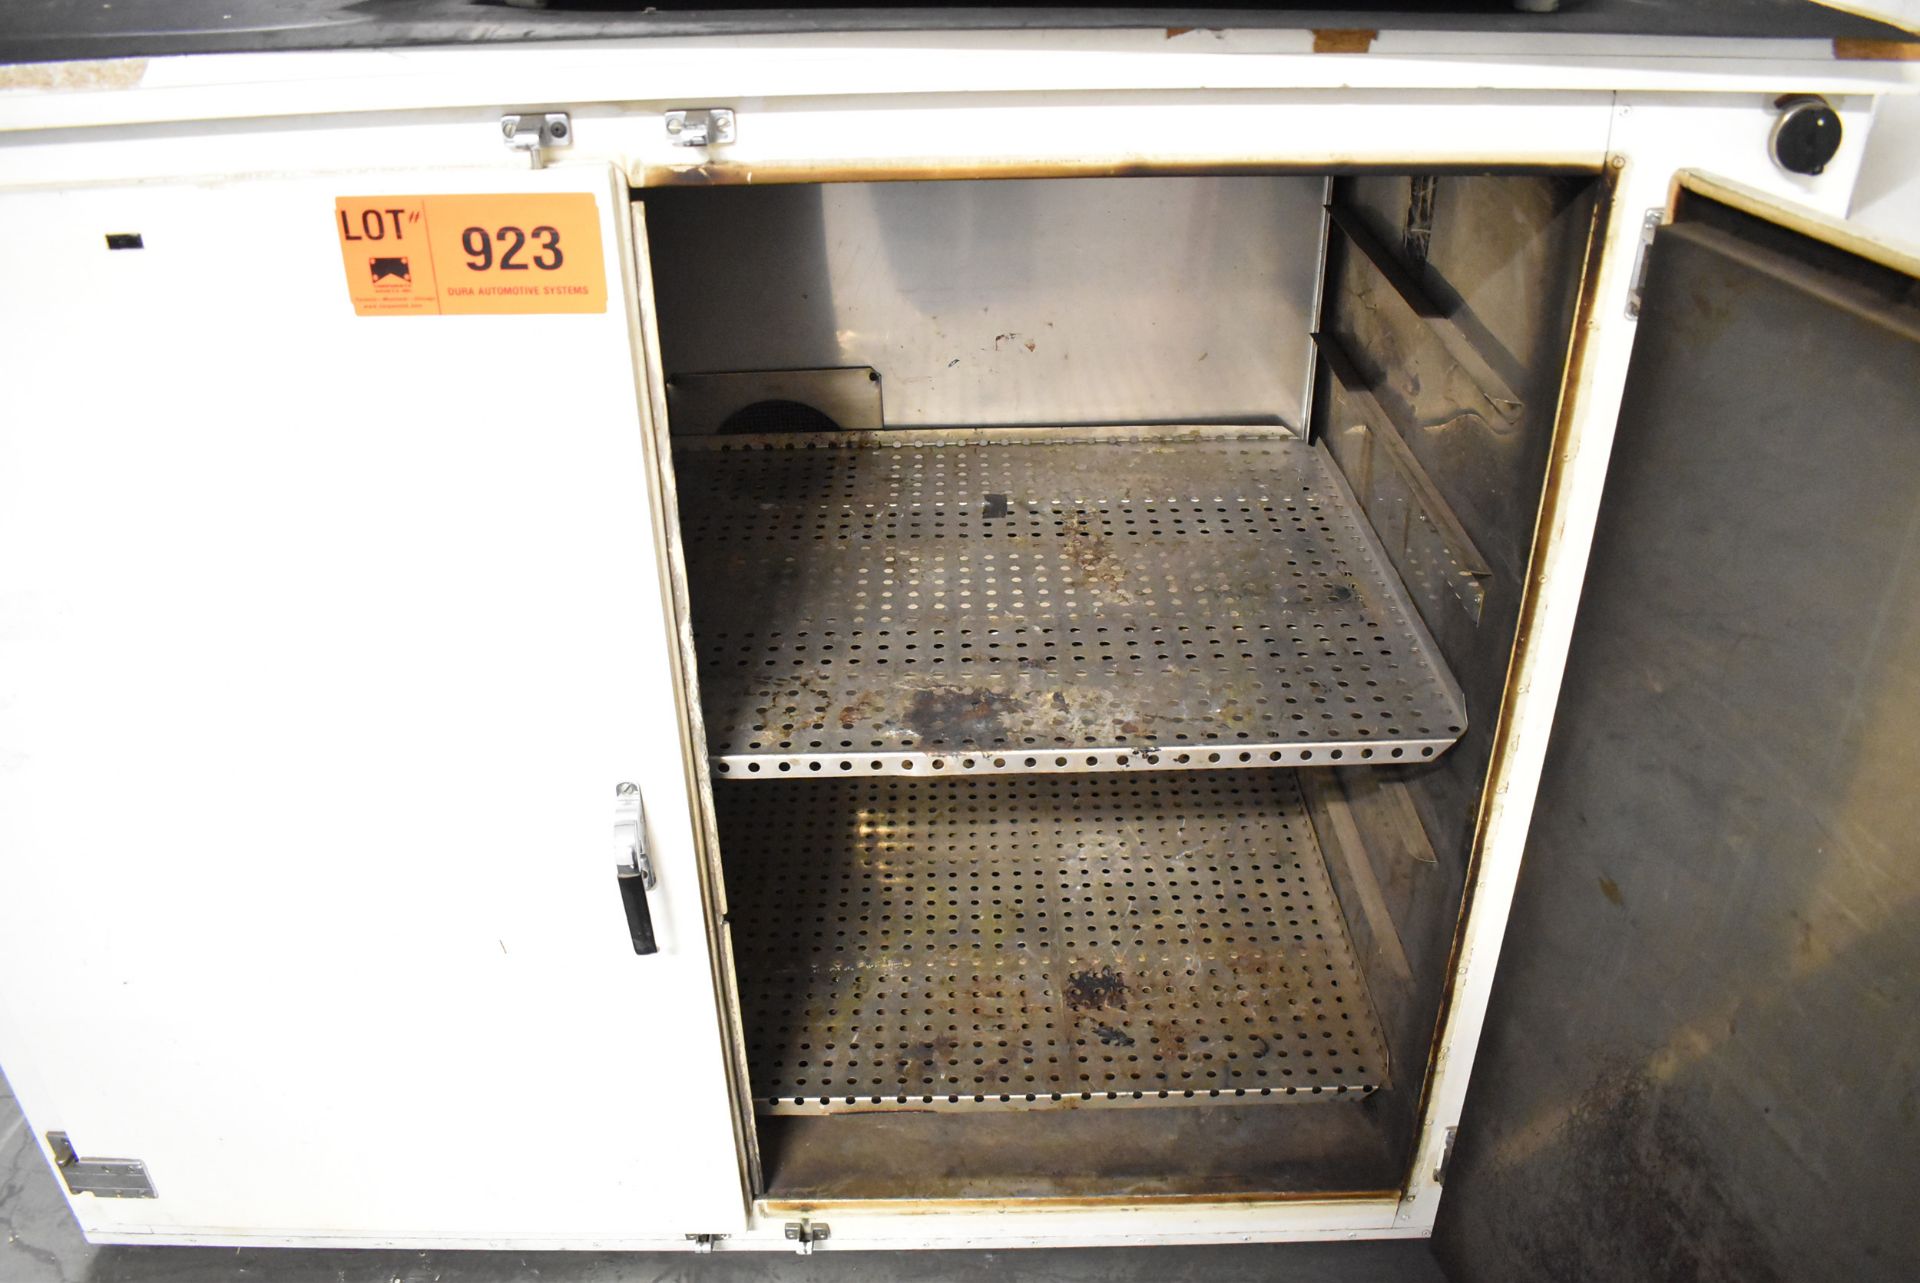 HORO 600V/SO ELECTRIC LAB OVEN WITH 150 DEG. C MAX. TEMP., S/N N/A (BAU 23) [Removal Fee = € 55 + - Image 3 of 3